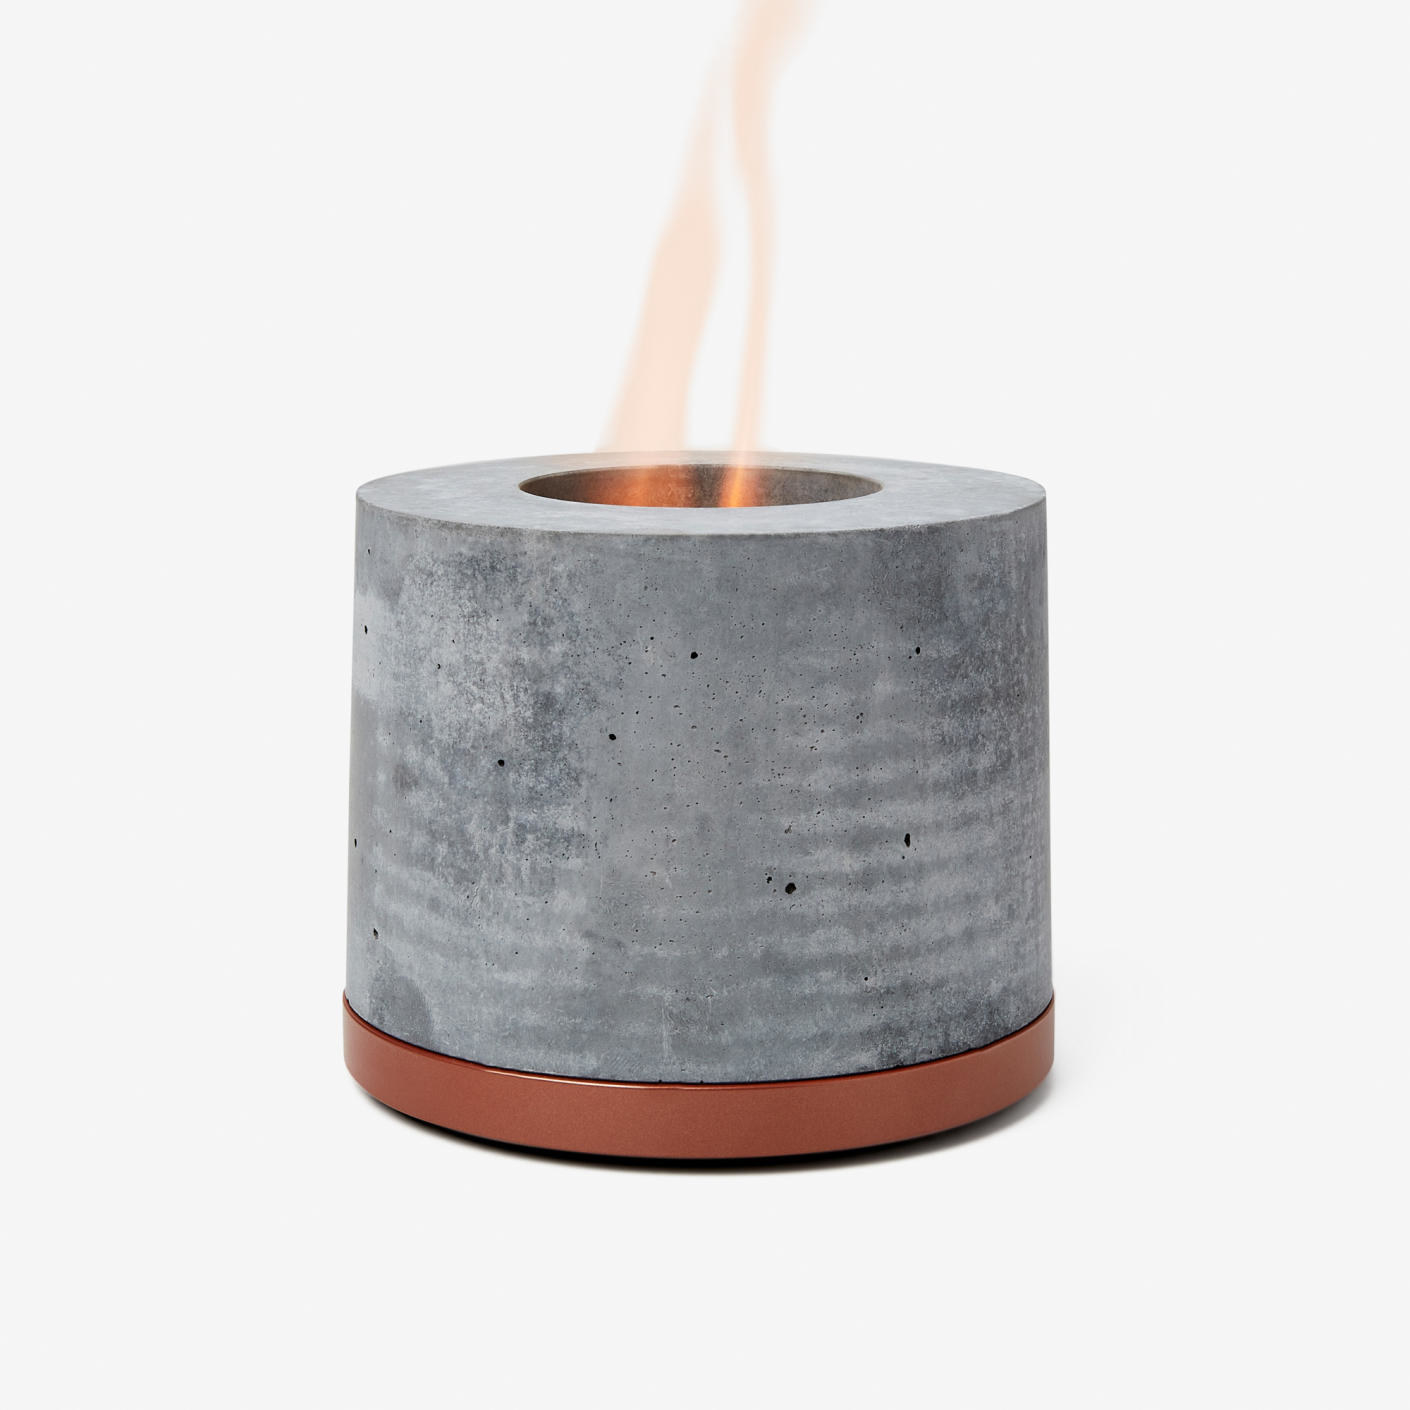 The round mini fireplace with a copper bottom